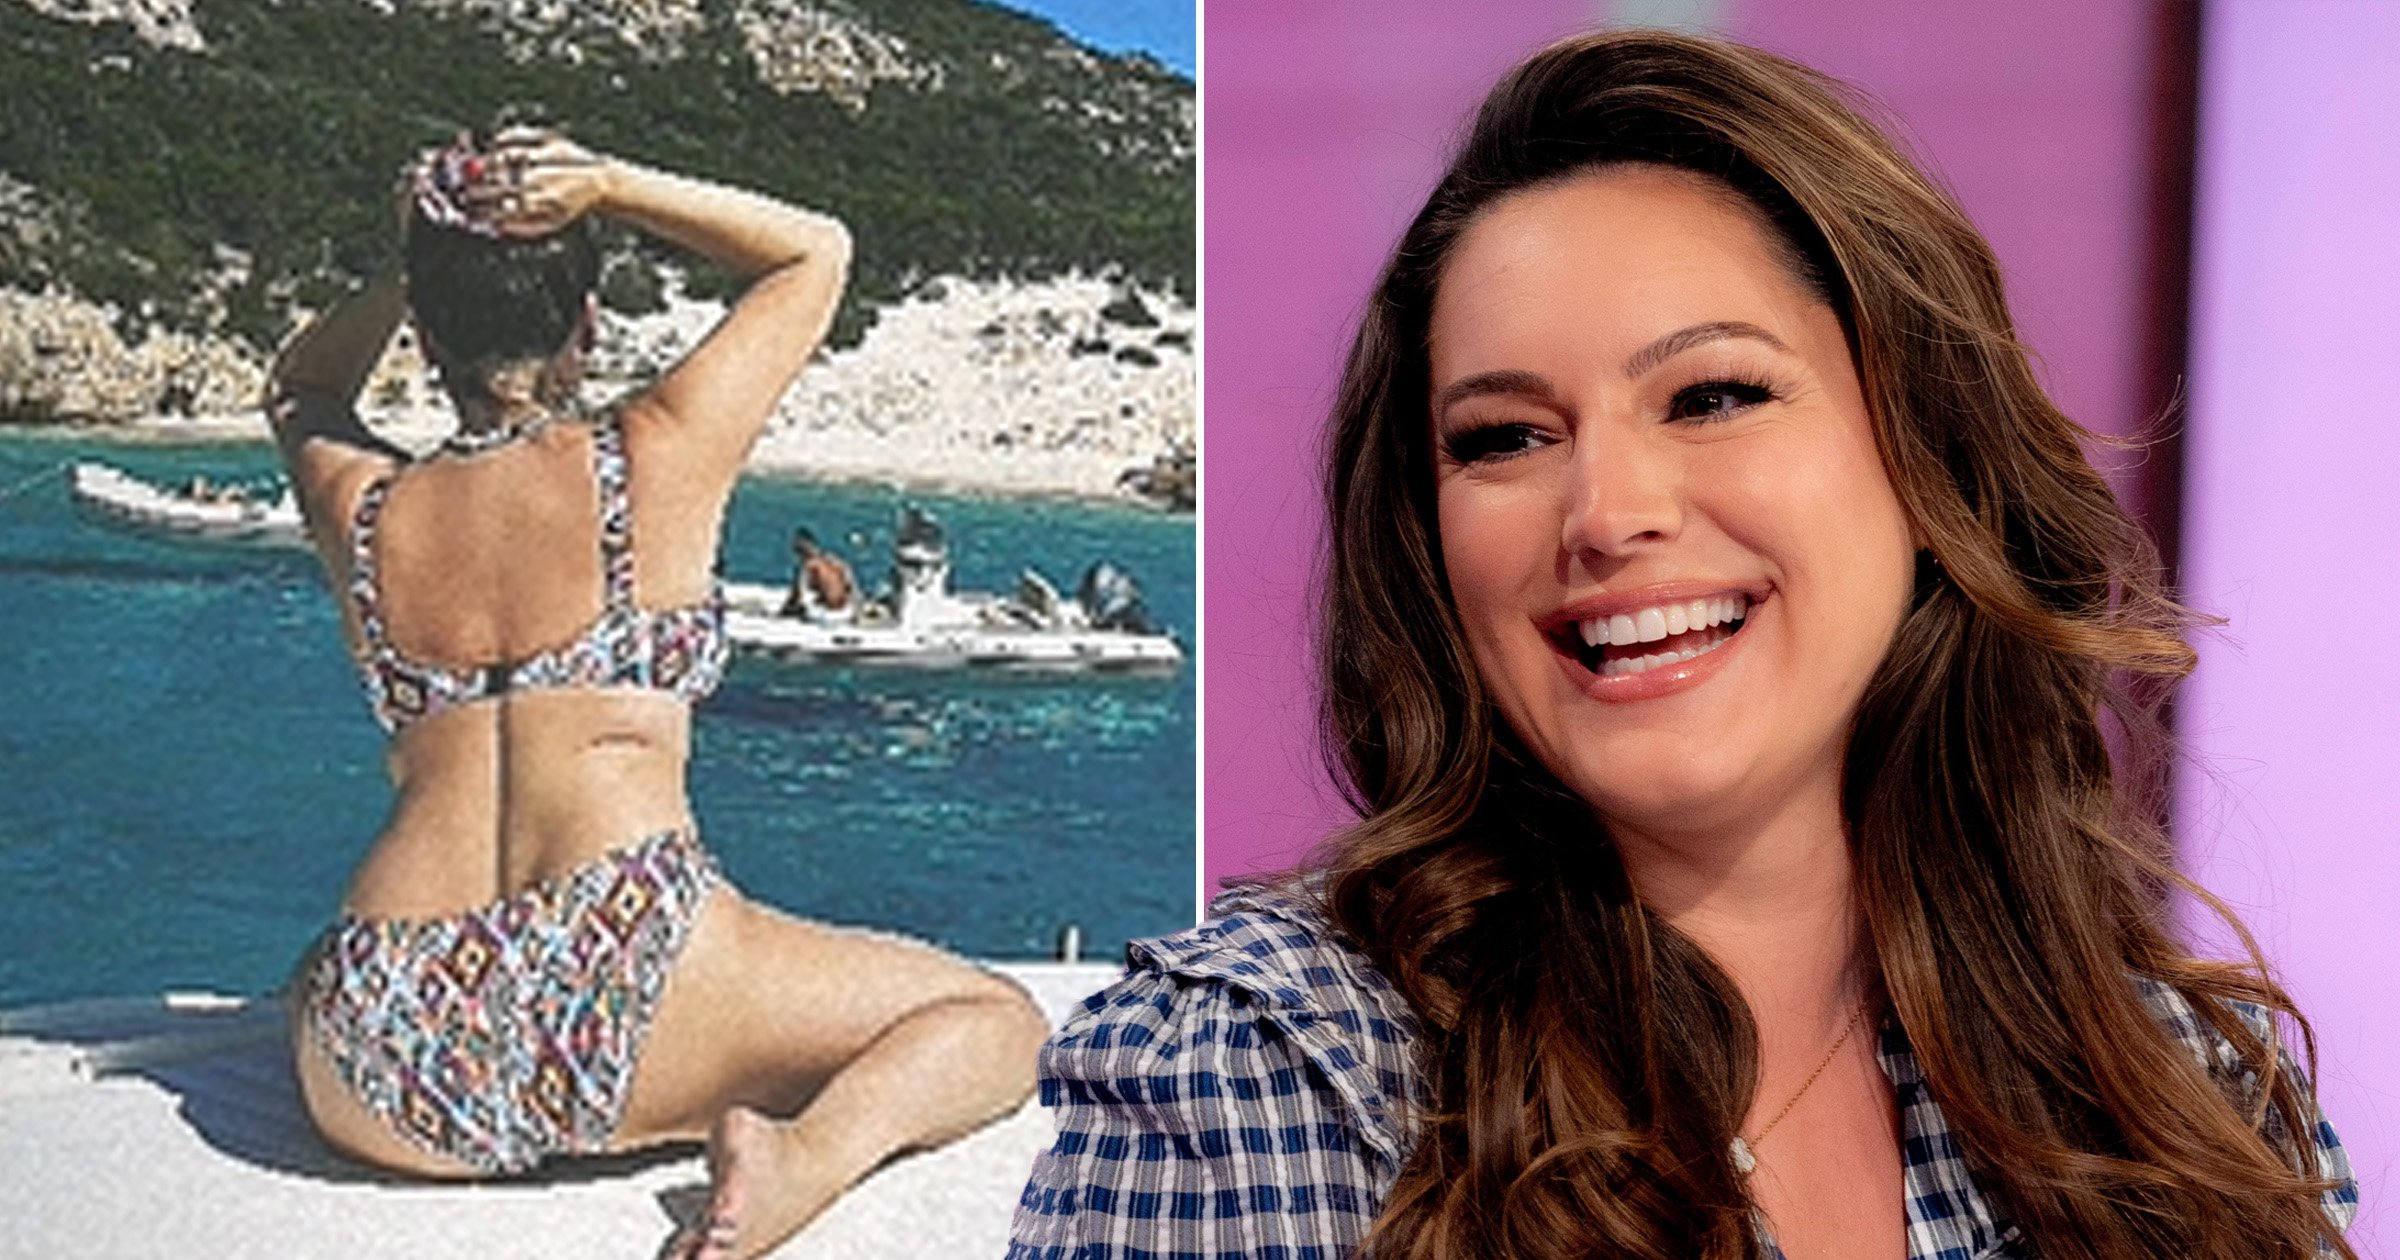 colin tran recommends pictures of kelly brook pic